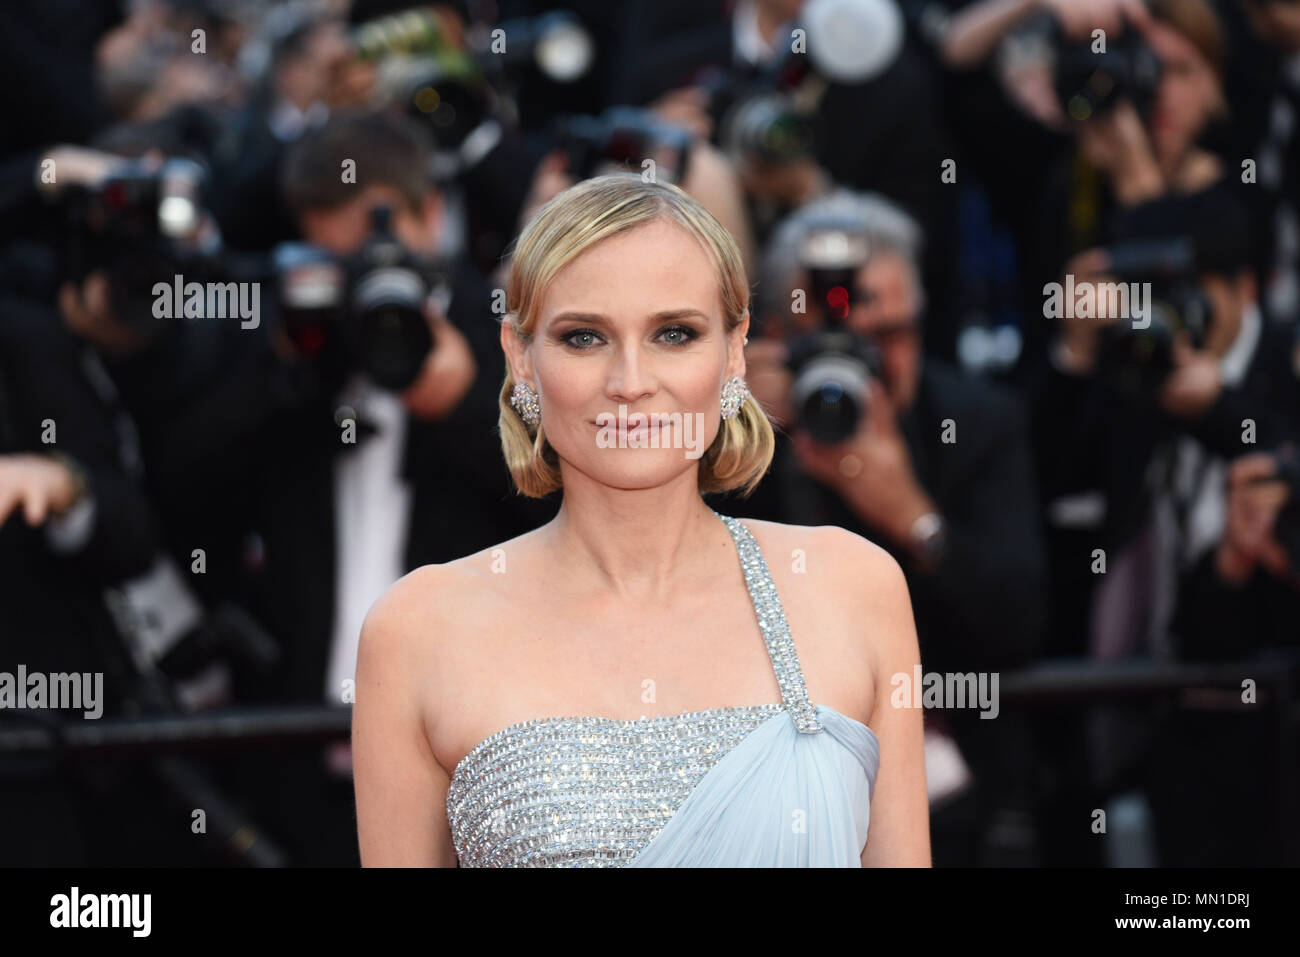 Cannes, France. 13th May, 2018. May 13, 2018 - Cannes, France: Diane Kruger attends the 'Sink or Swim' premiere during the 71st Cannes film festival. Credit: Idealink Photography/Alamy Live News Stock Photo